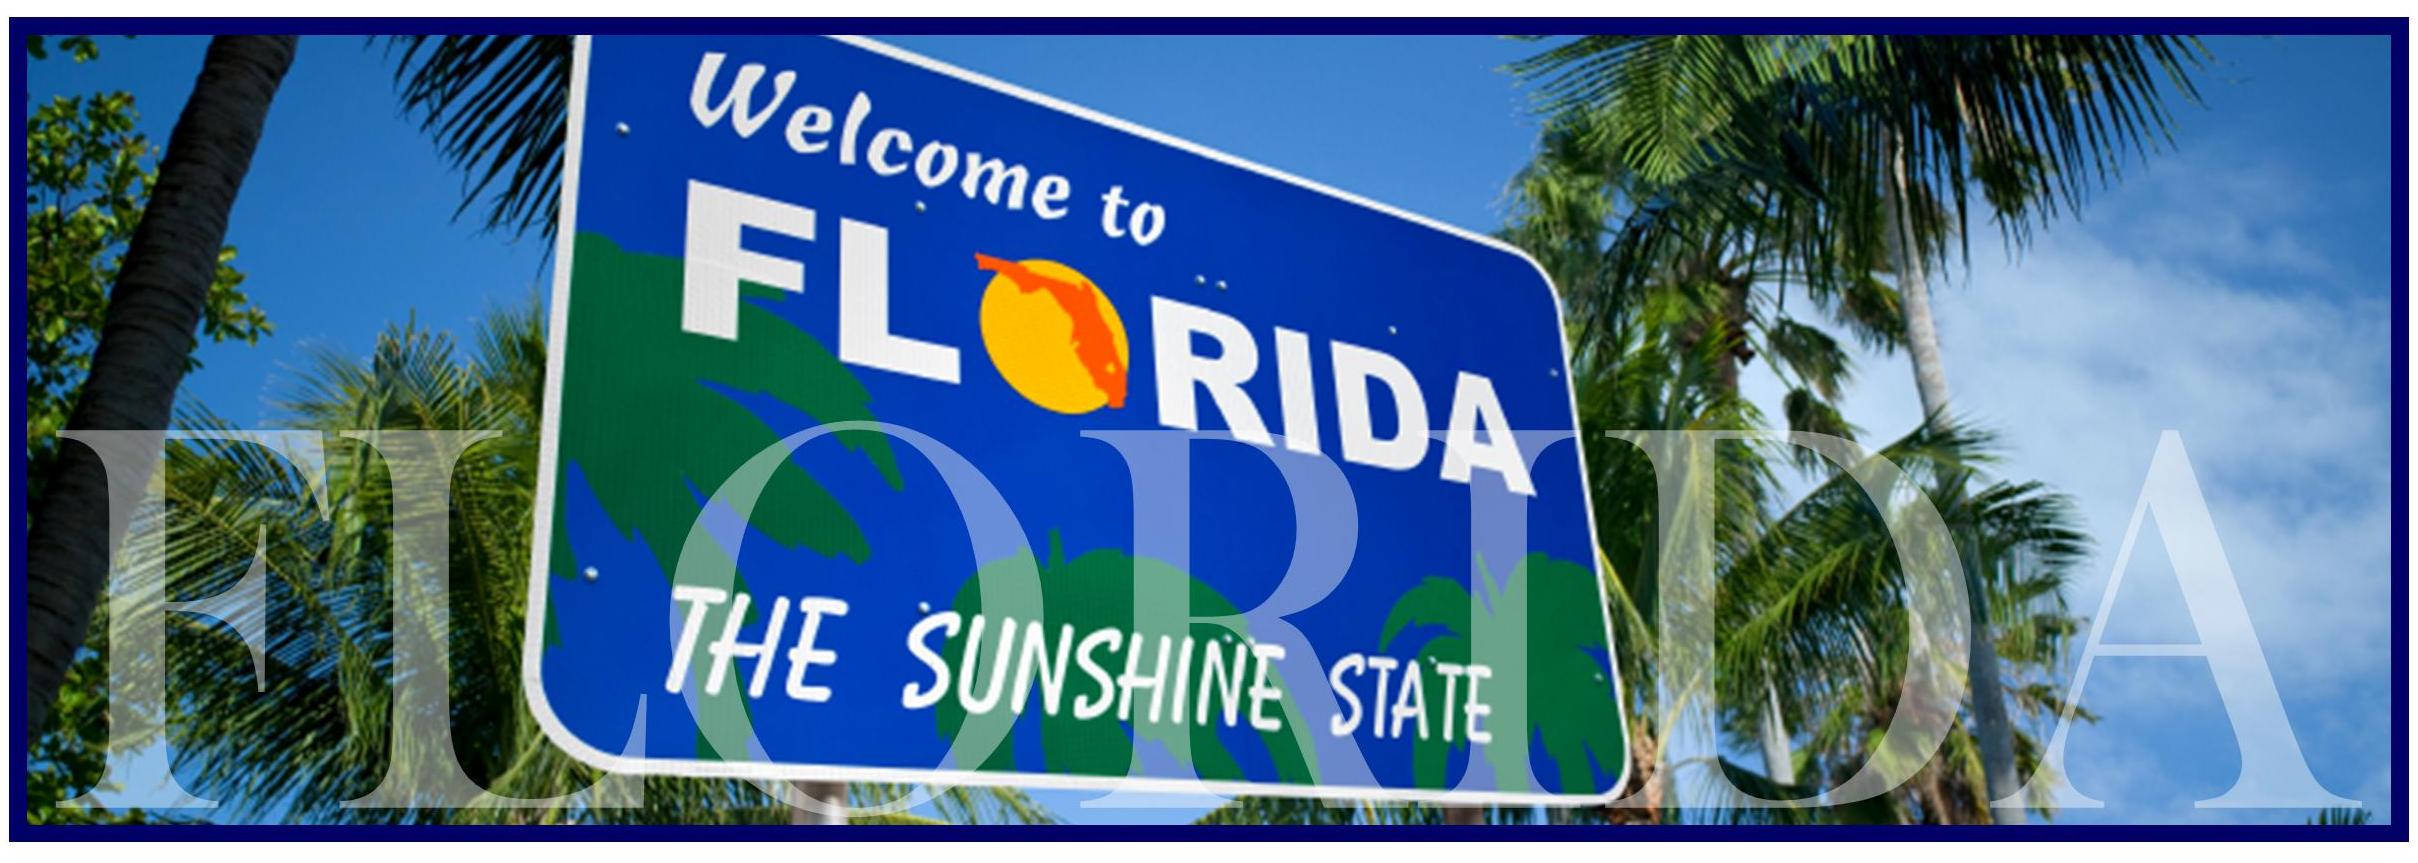 What You Need To Know About Florida Auto Insurance That May Be Different Than Other States